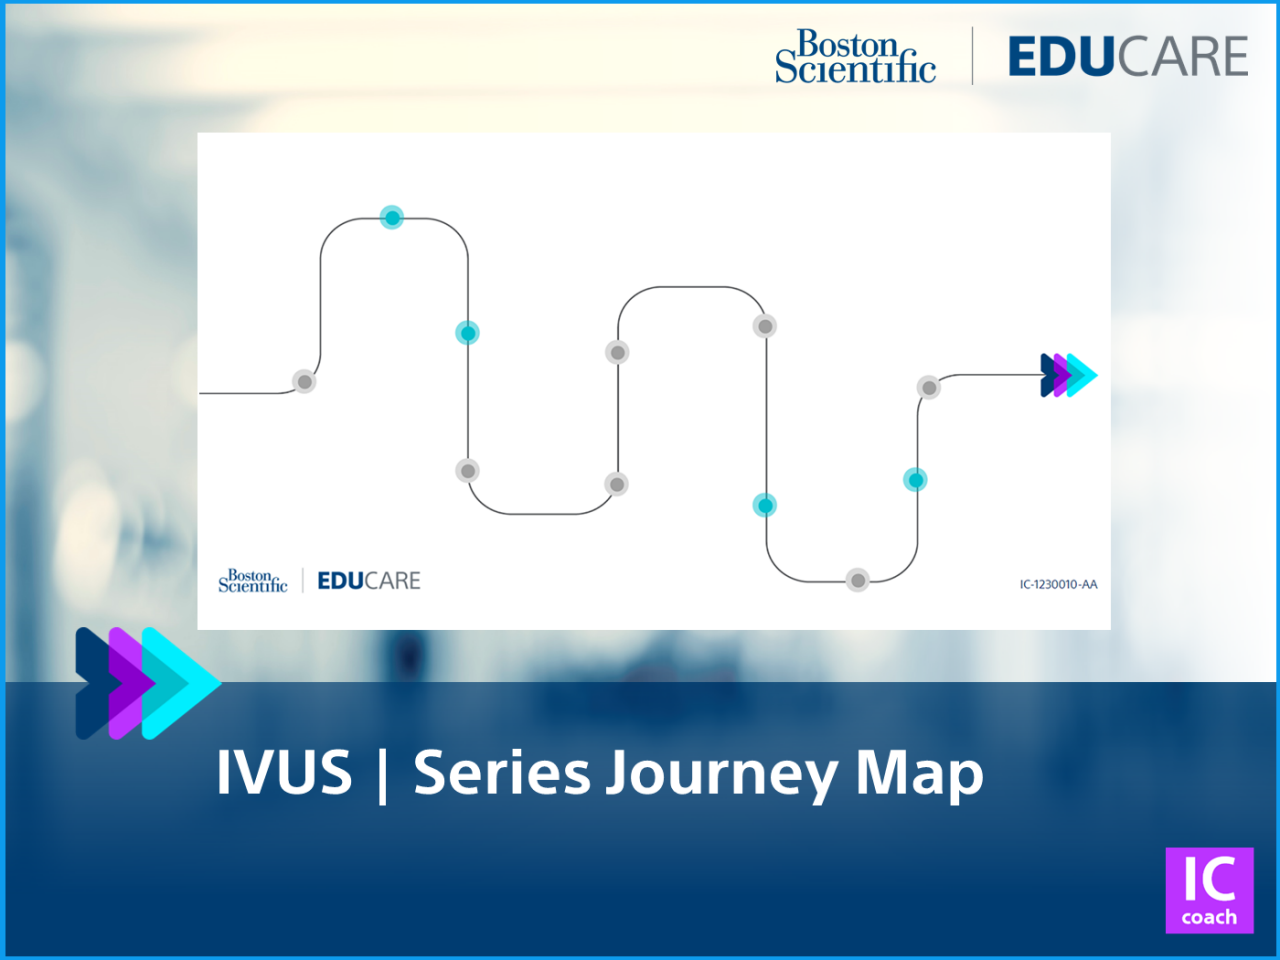 IVUS Series journey map on EDUCARE allows users to participate in learning exercises and case studies at their own pace.